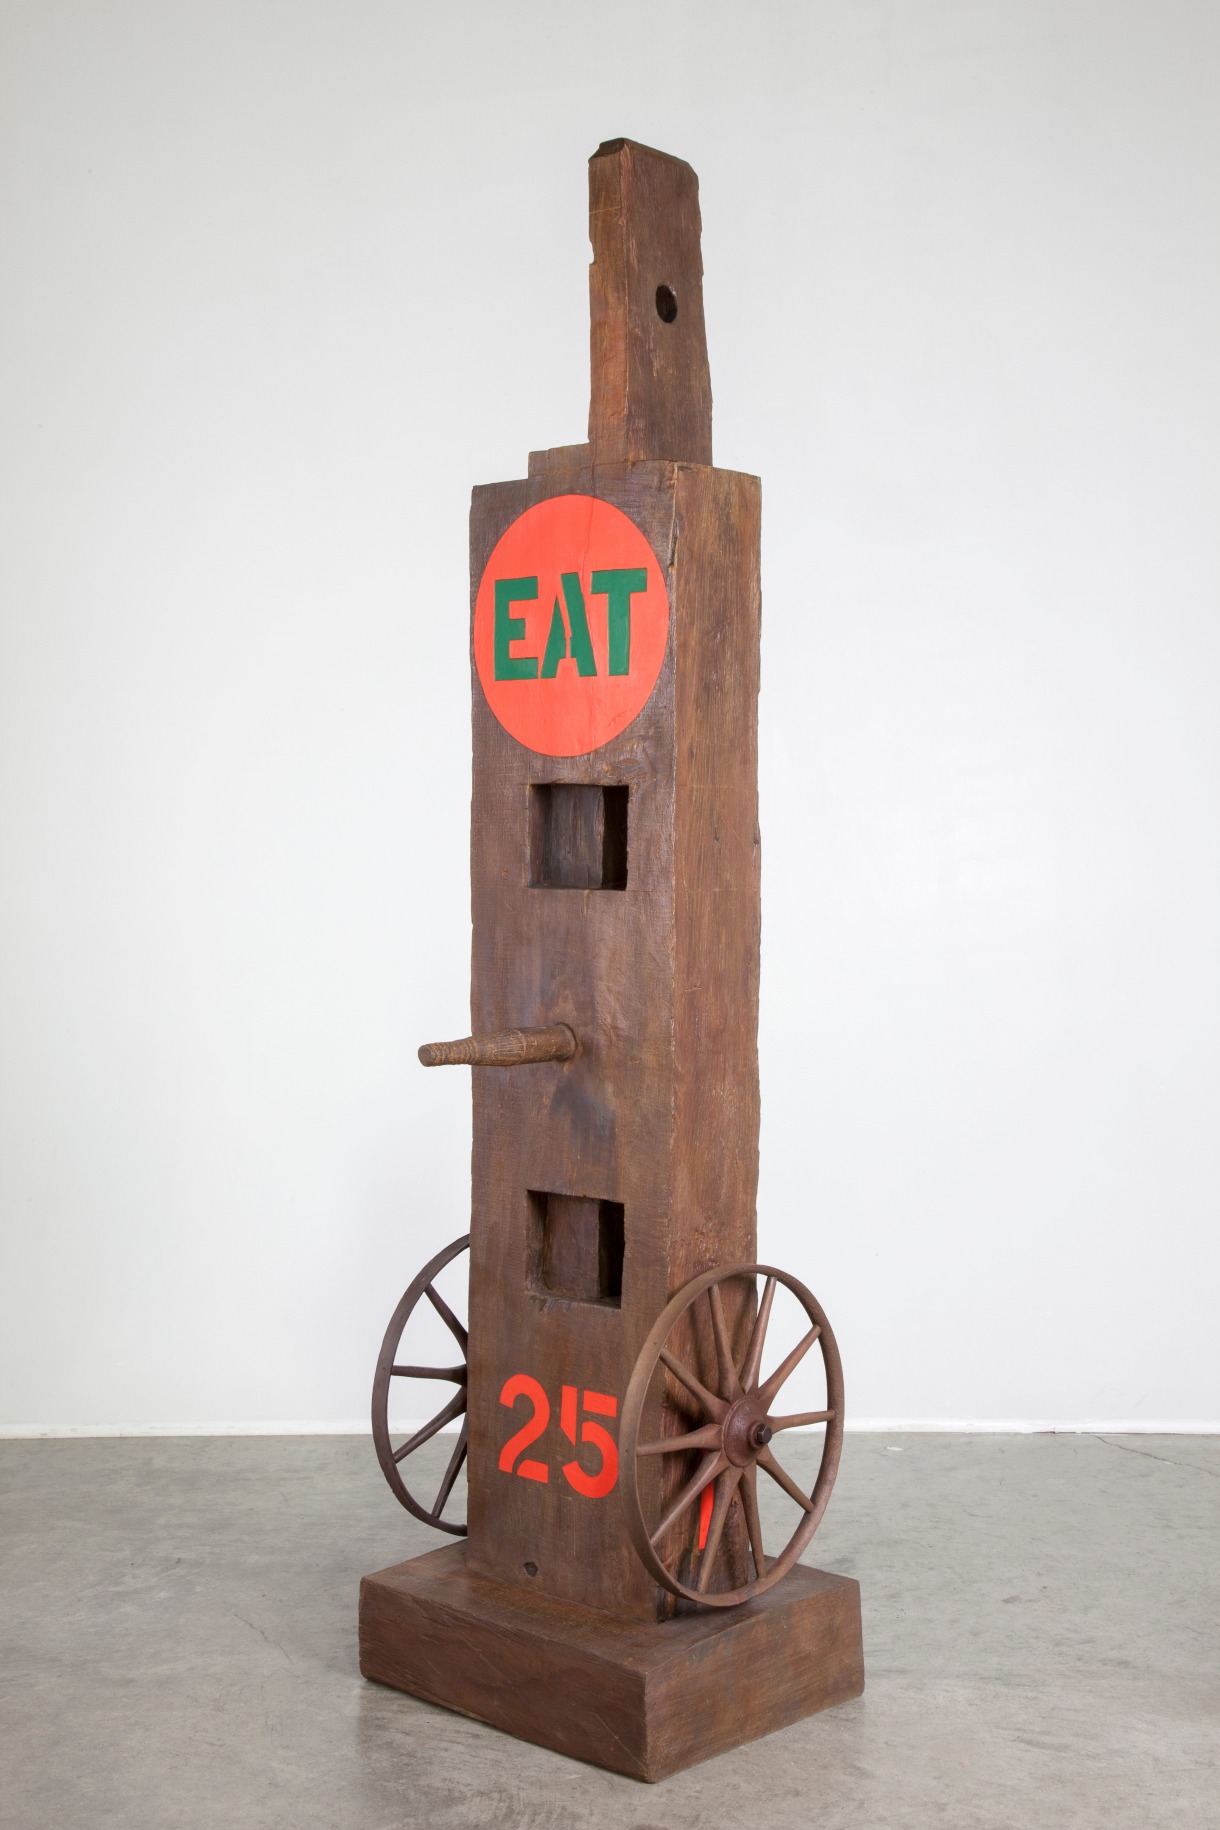 Eat is a 58 5/8 by 15 by 12 5/8 painted bronze sculpture of a beam with a tenon, standing on a base. A wheel is affixed to the right and left sides at the bottom of the sculpture. In between a red number 25 has been painted. A peg protrudes from the center of the sculpture, and at the top of the sculpture is a red circle containing the word &quot;eat&quot; painted in green stenciled letters.